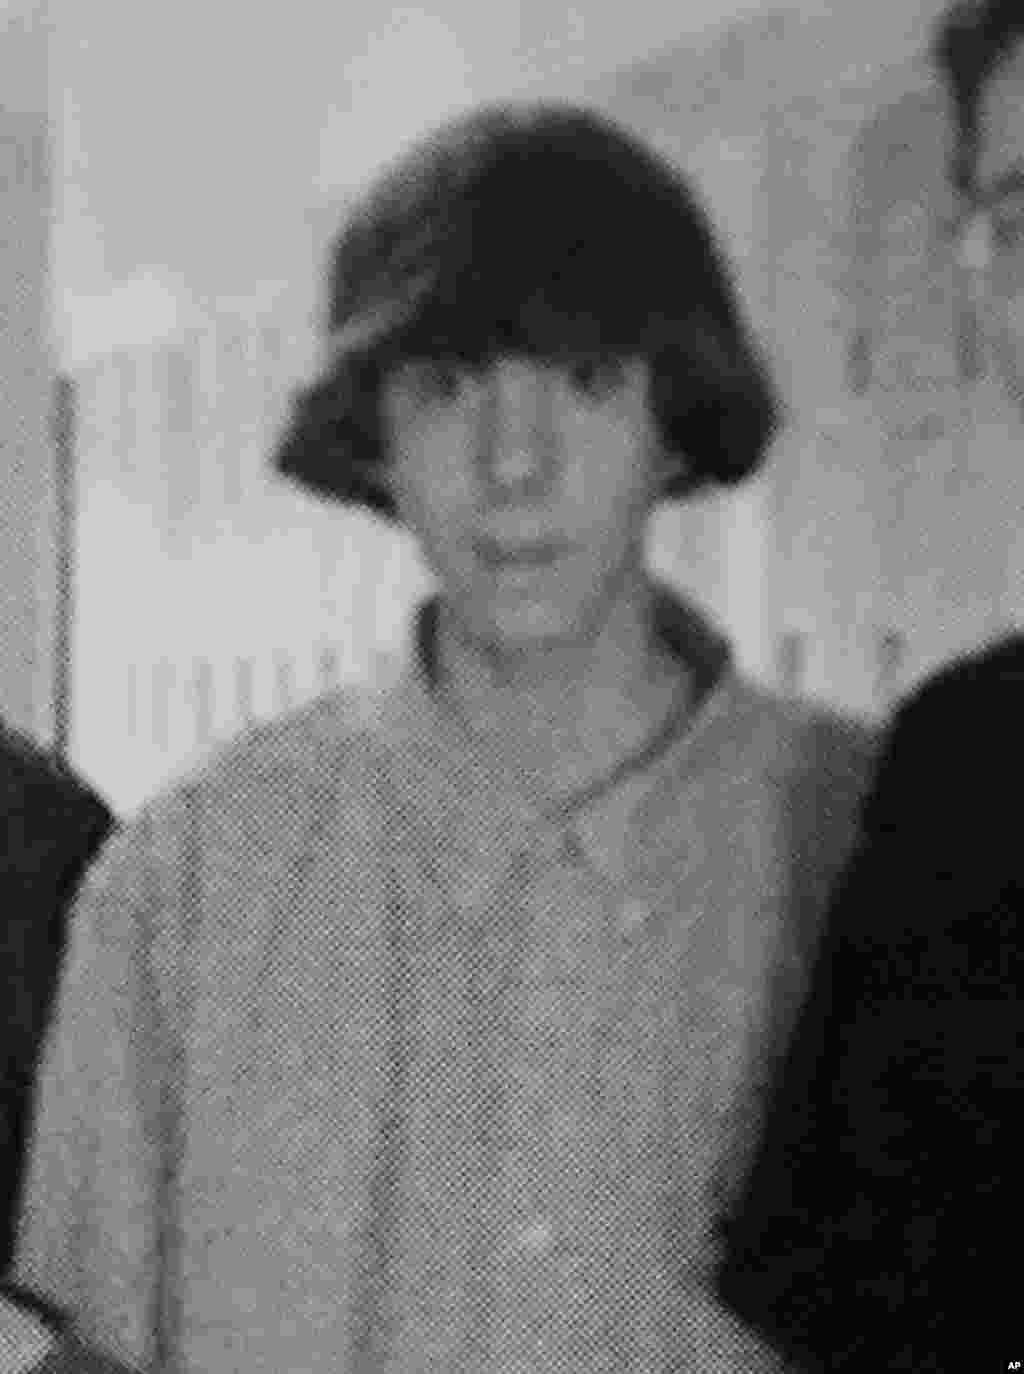 This undated photo shows Adam Lanza posing for a group photo of the technology club which appeared in the Newtown High School yearbook.